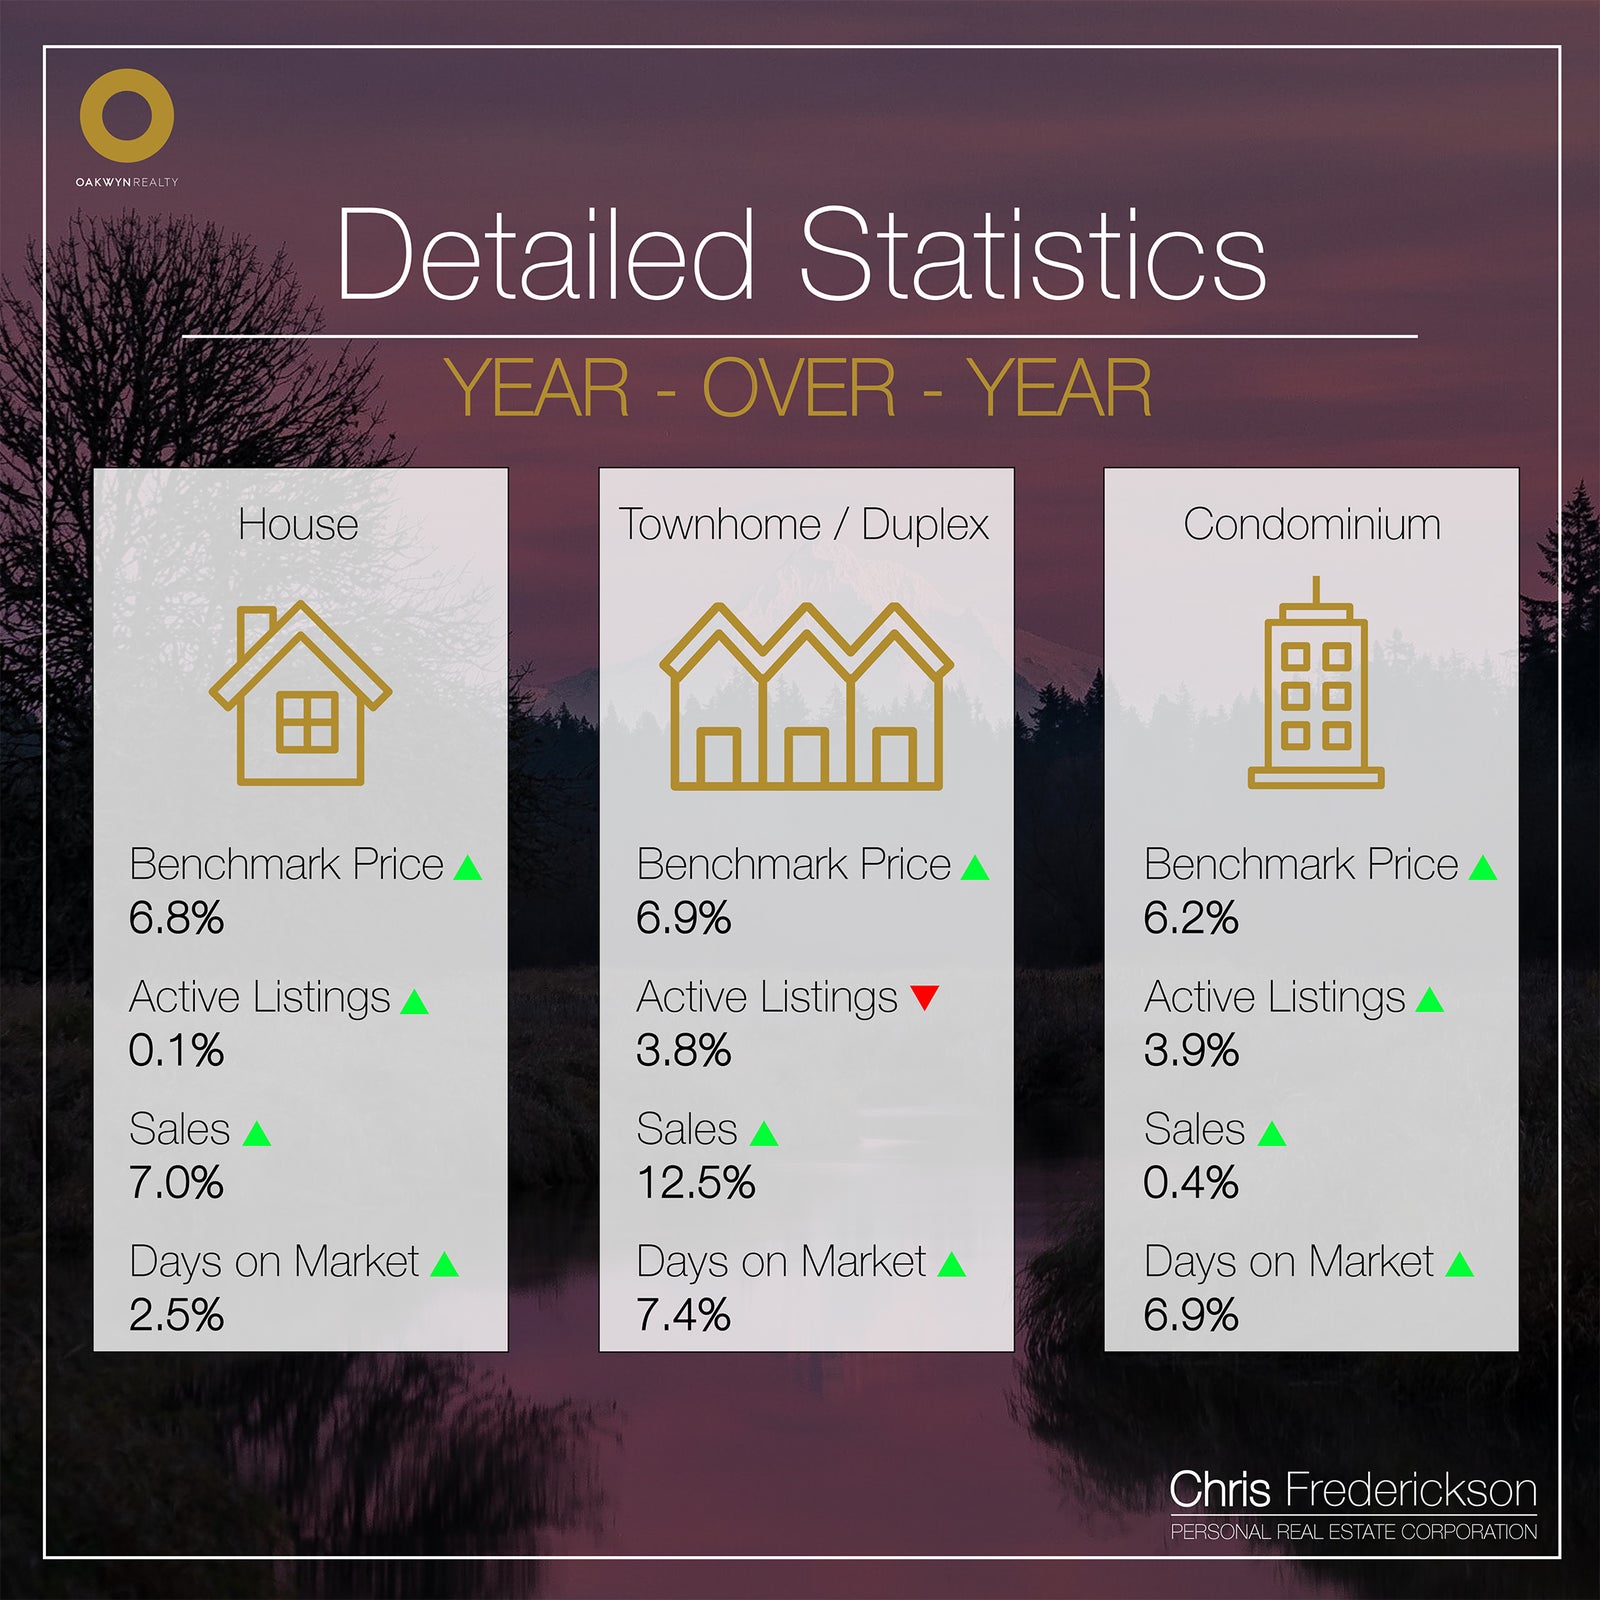 Details Statistics Year-over-Year Real Estate Vancouver Market Stats Chris Frederickson